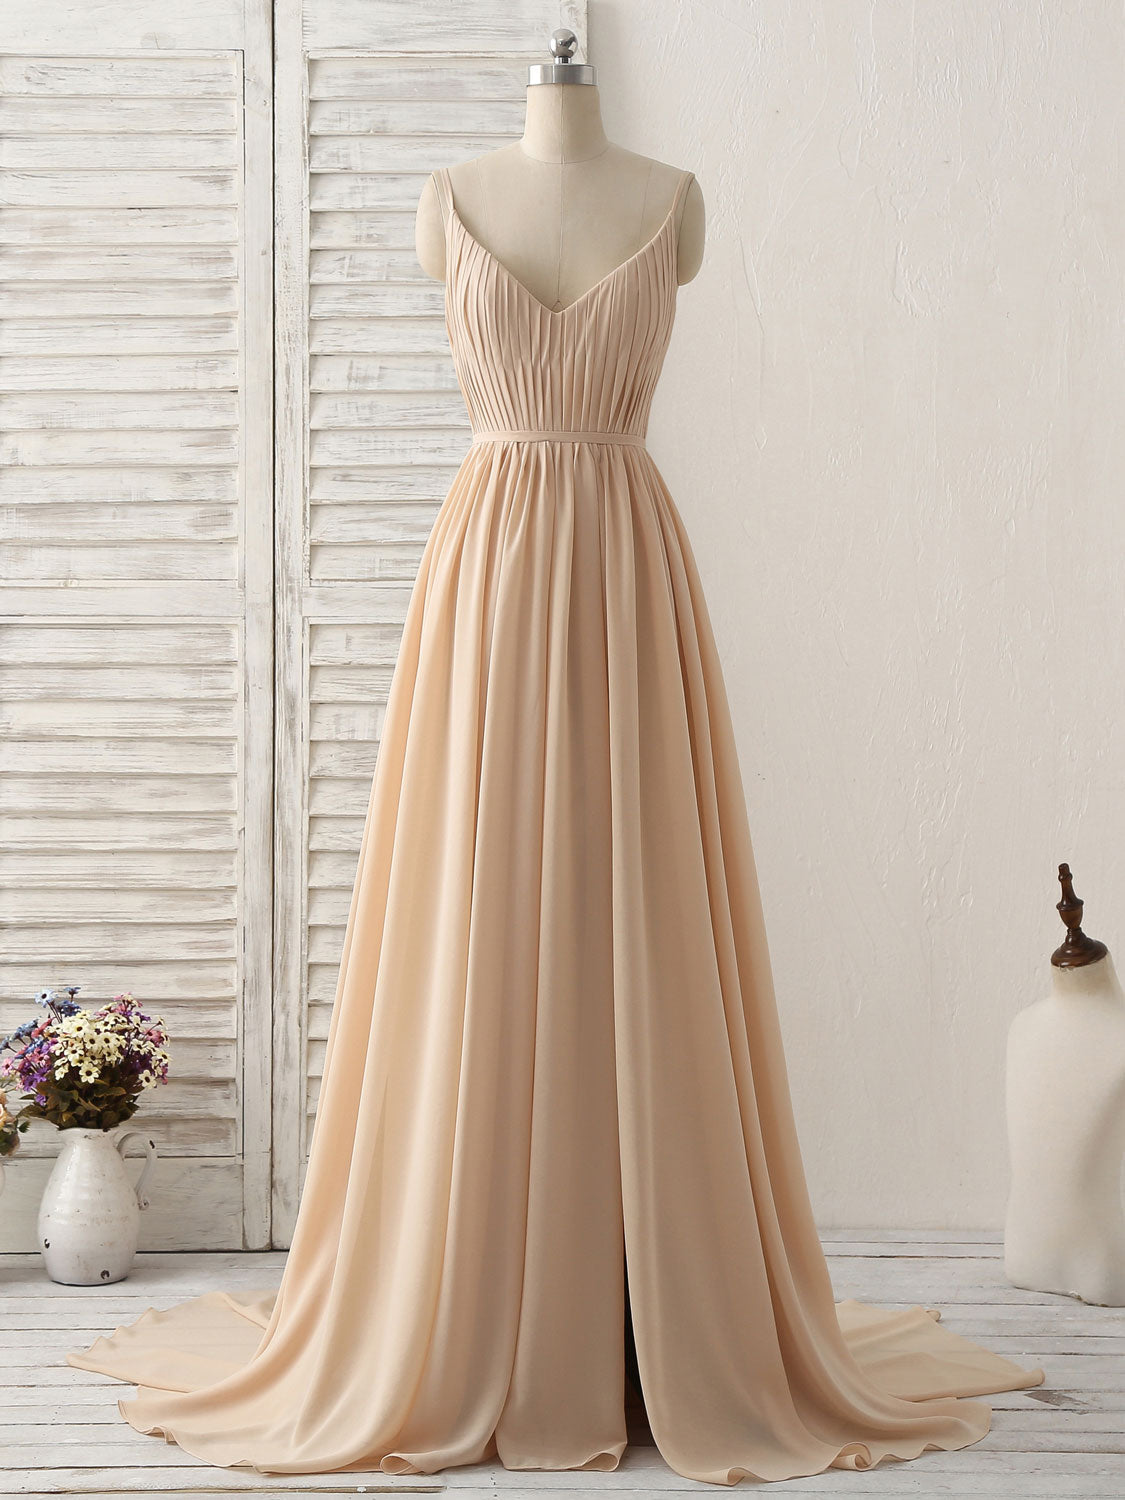 Formal Dresses For Wedding Guest, Simple Champagne Long Prom Dresses V Neck Chiffon Bridesmaid Dress